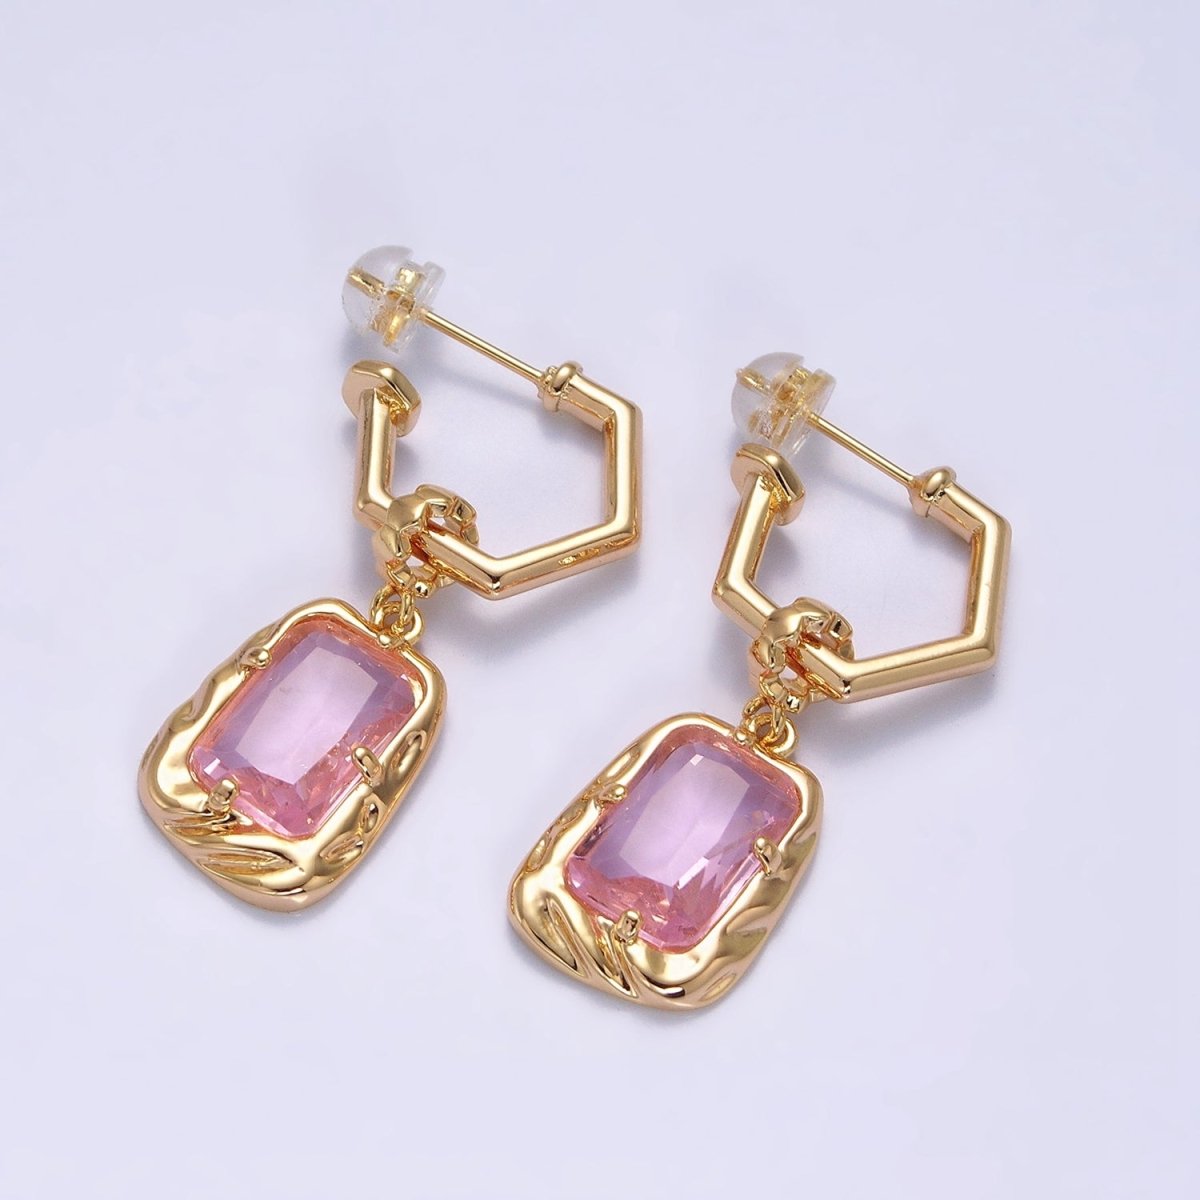 Gold Hoop Earring with Drop Rectangle Colorful Cubic Zirconia Stone in Silver, Gold Earring AB678 - AB689 - DLUXCA